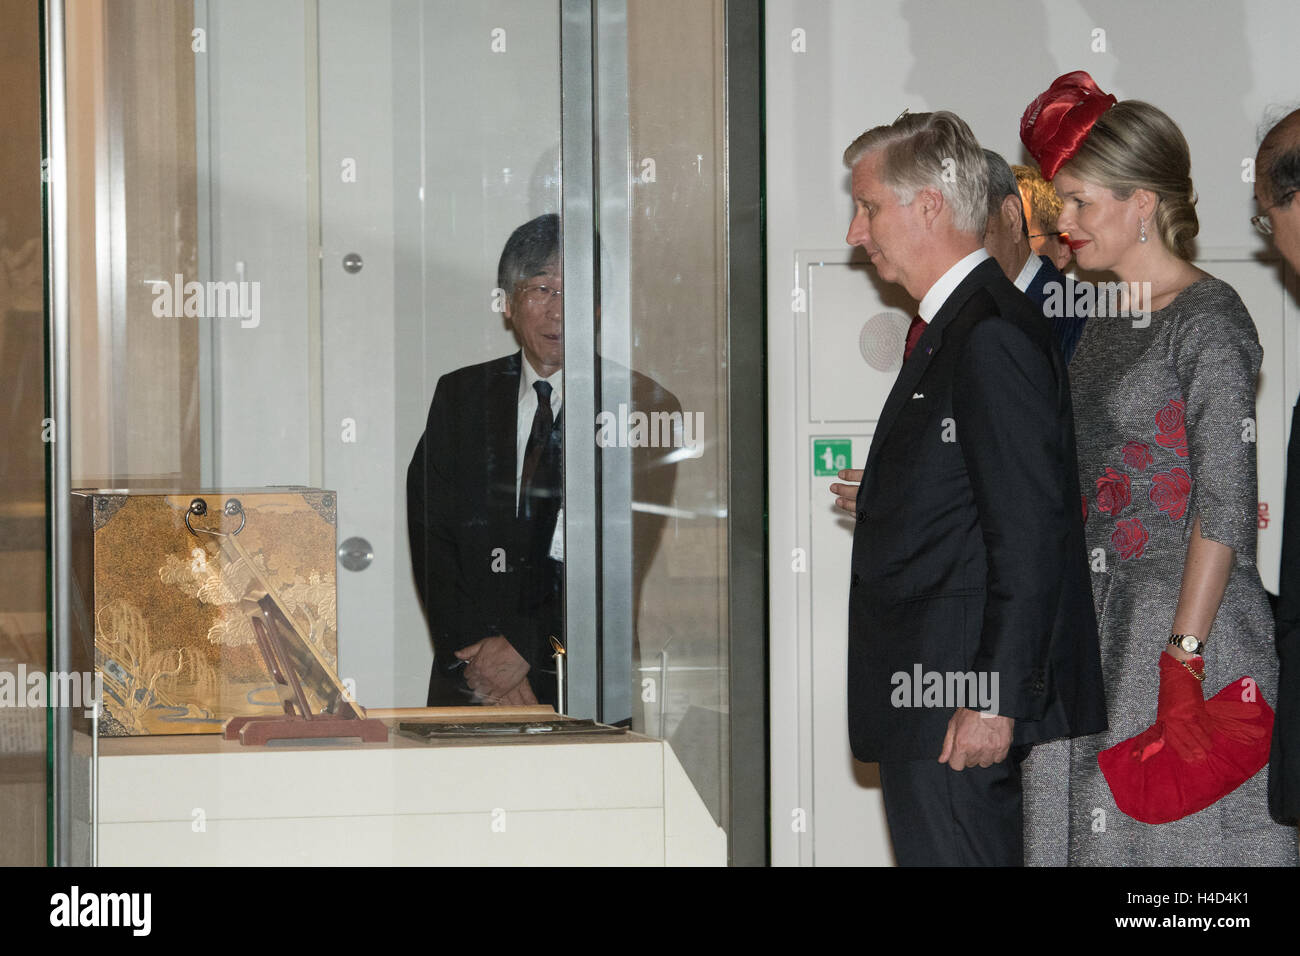 King Philippe - Filip of Belgium and Queen Mathilde of Belgium pictured during a royal visit to the Tokugawa Art Museum in Nagoya, Japan, on day four of a state visit to Japan of the Belgian Royals, Thursday 13 October 2016. BELGA PHOTO POOL CHRISTOPHE LICOPPE Stock Photo